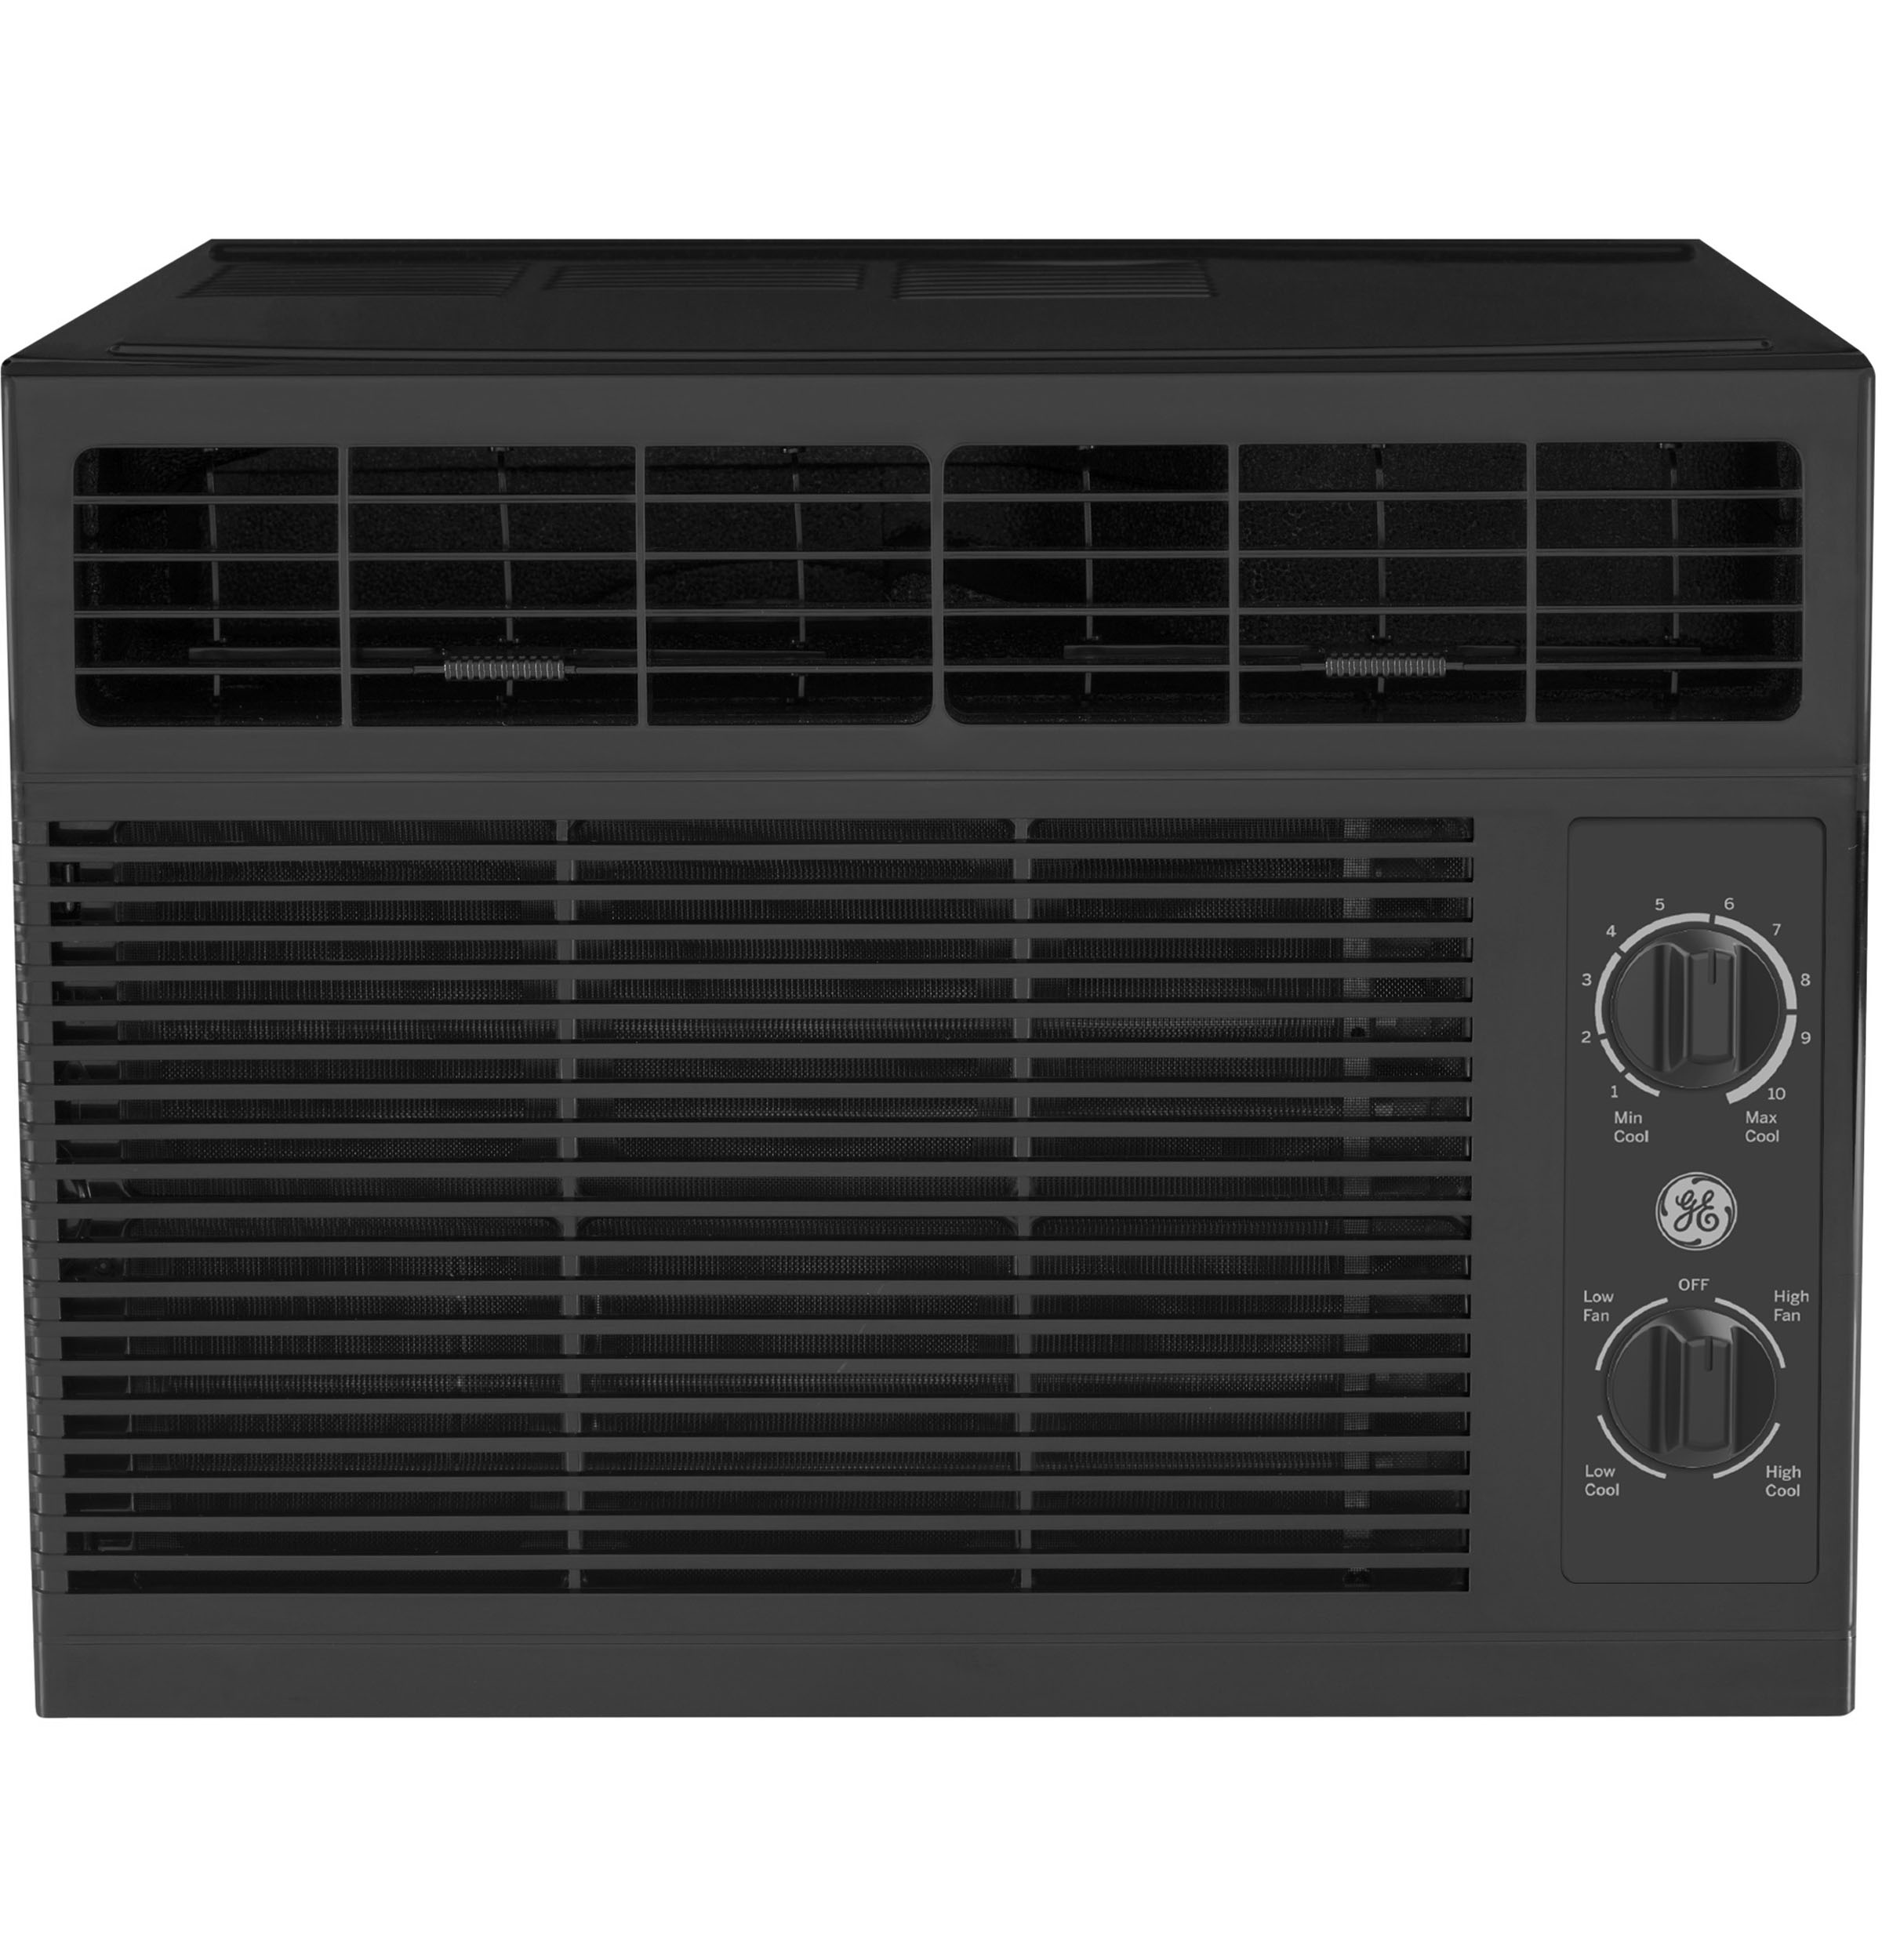 GE® 5,000 BTU Mechanical Window Air Conditioner for Small Rooms up to 150 sq ft., Black